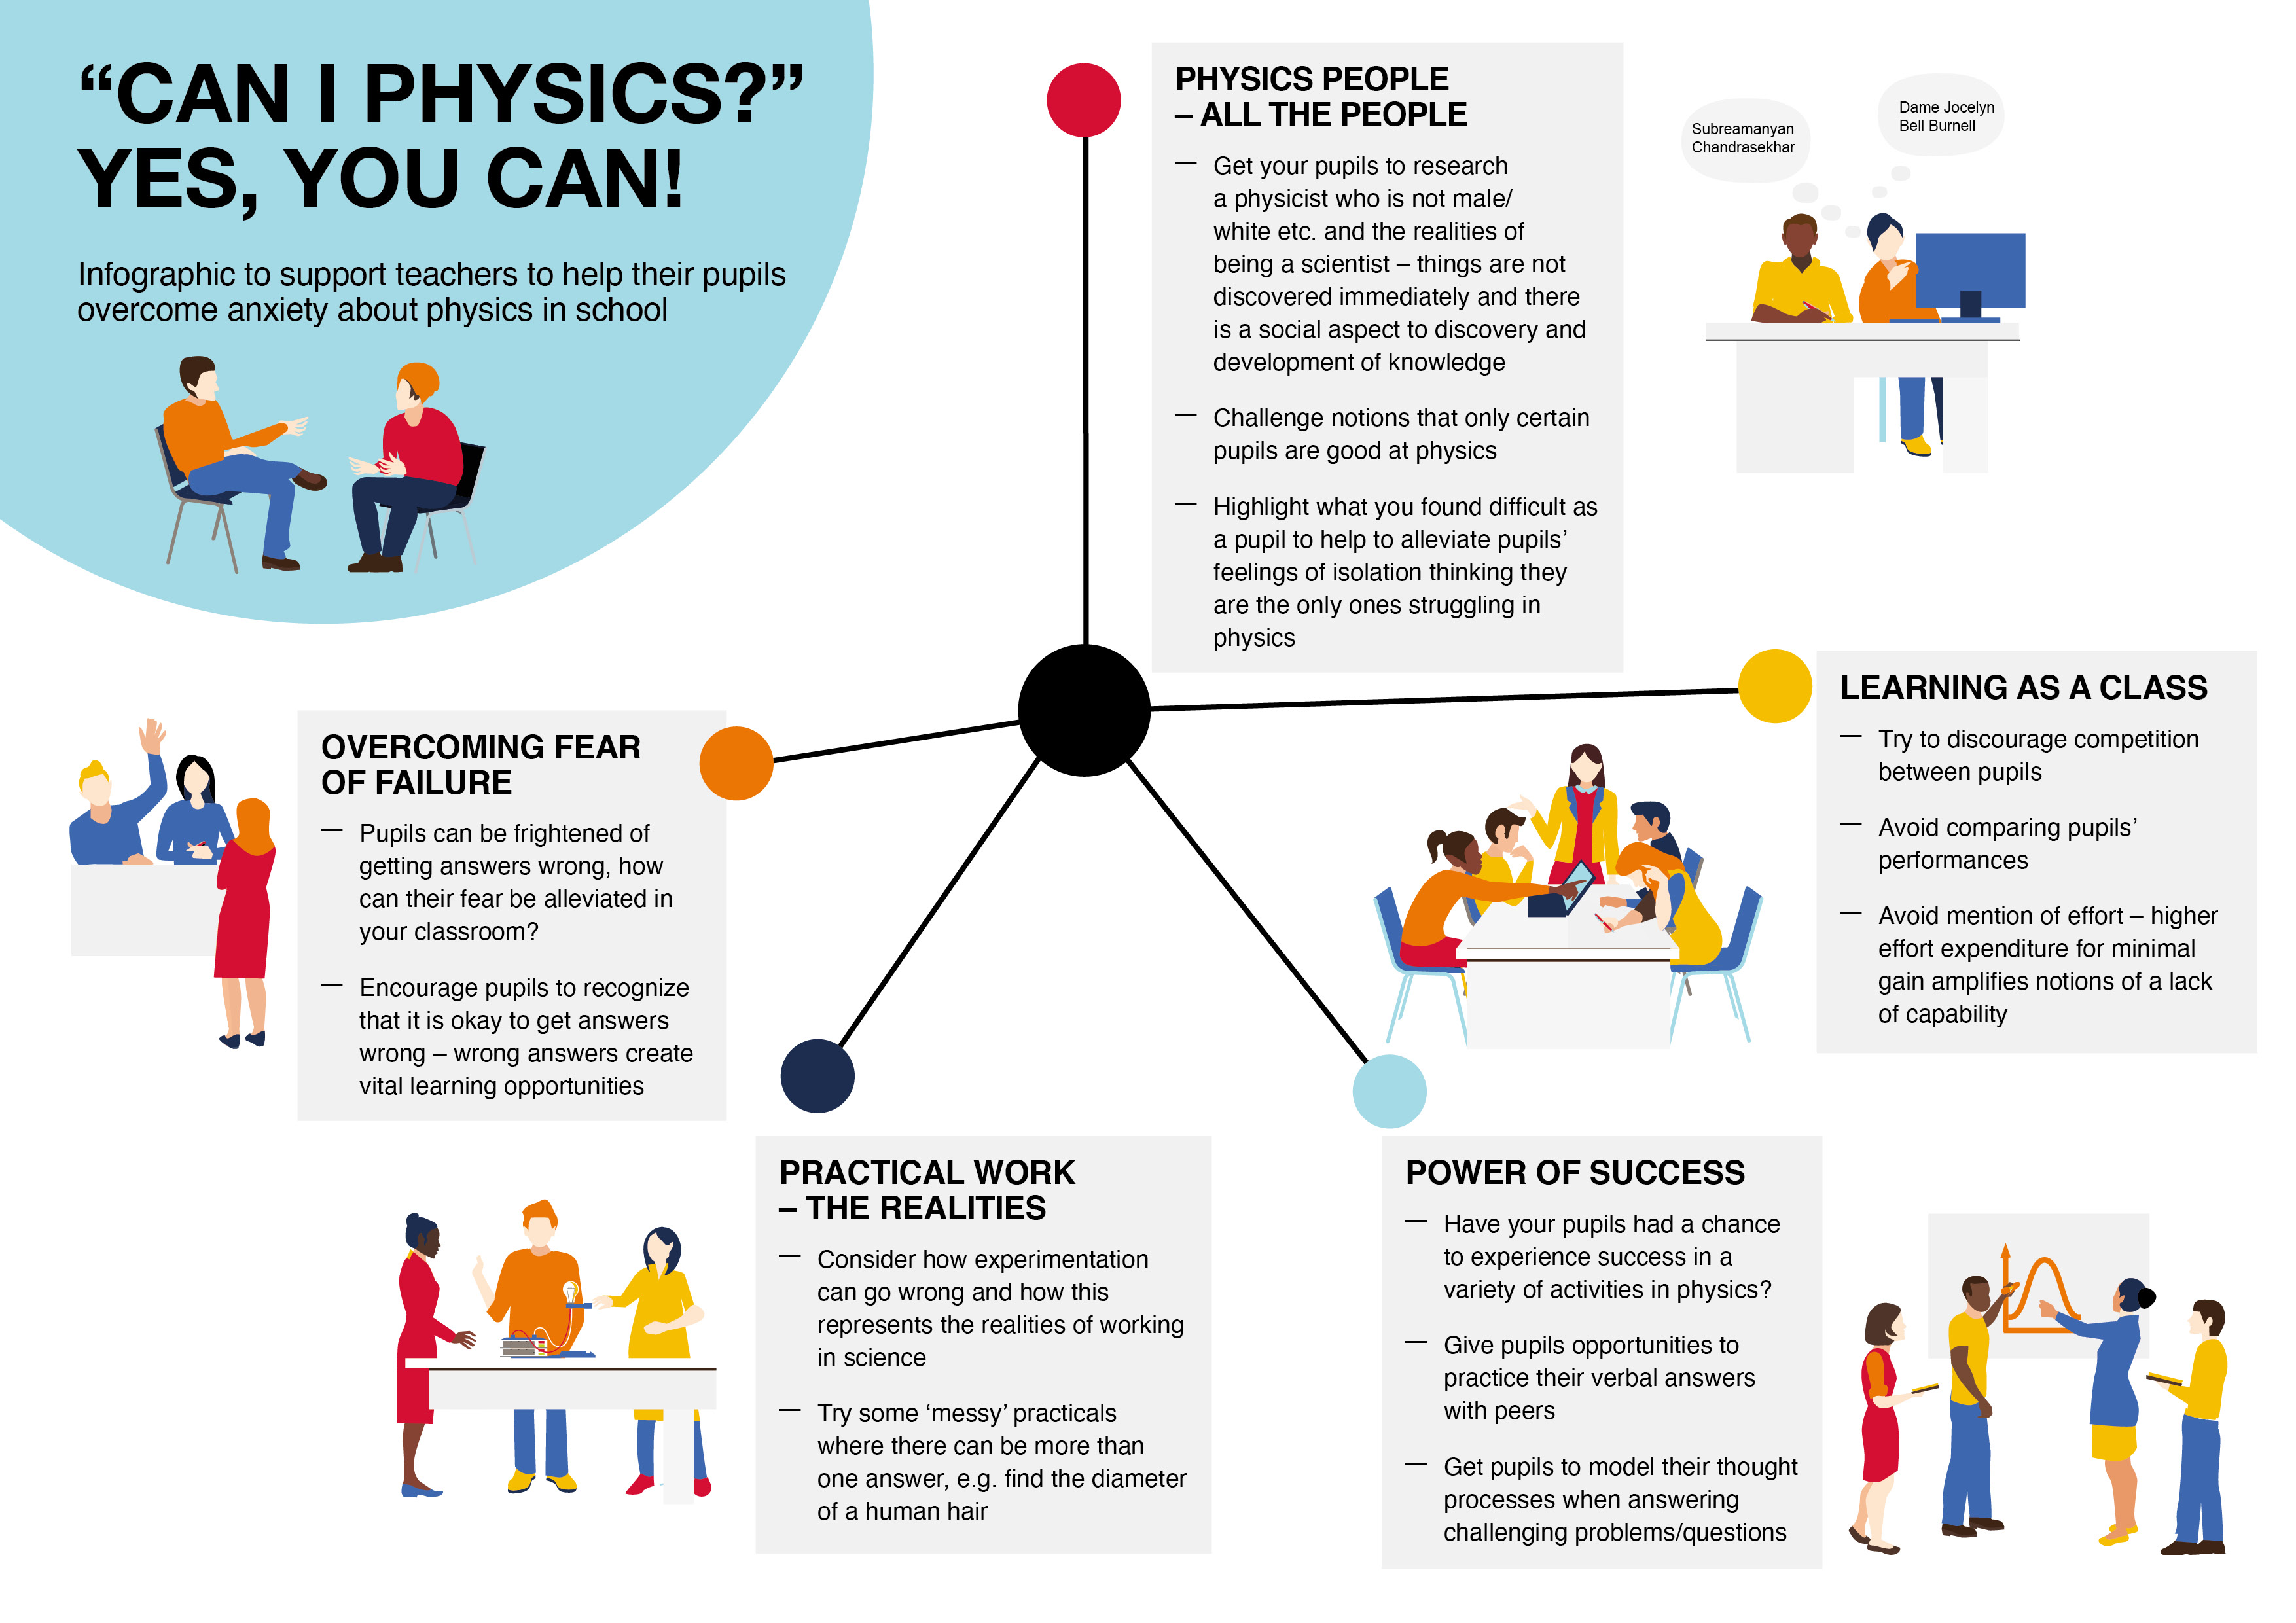 Can I Physics - Yes you can! Infographic illustrated by Janine Clayton